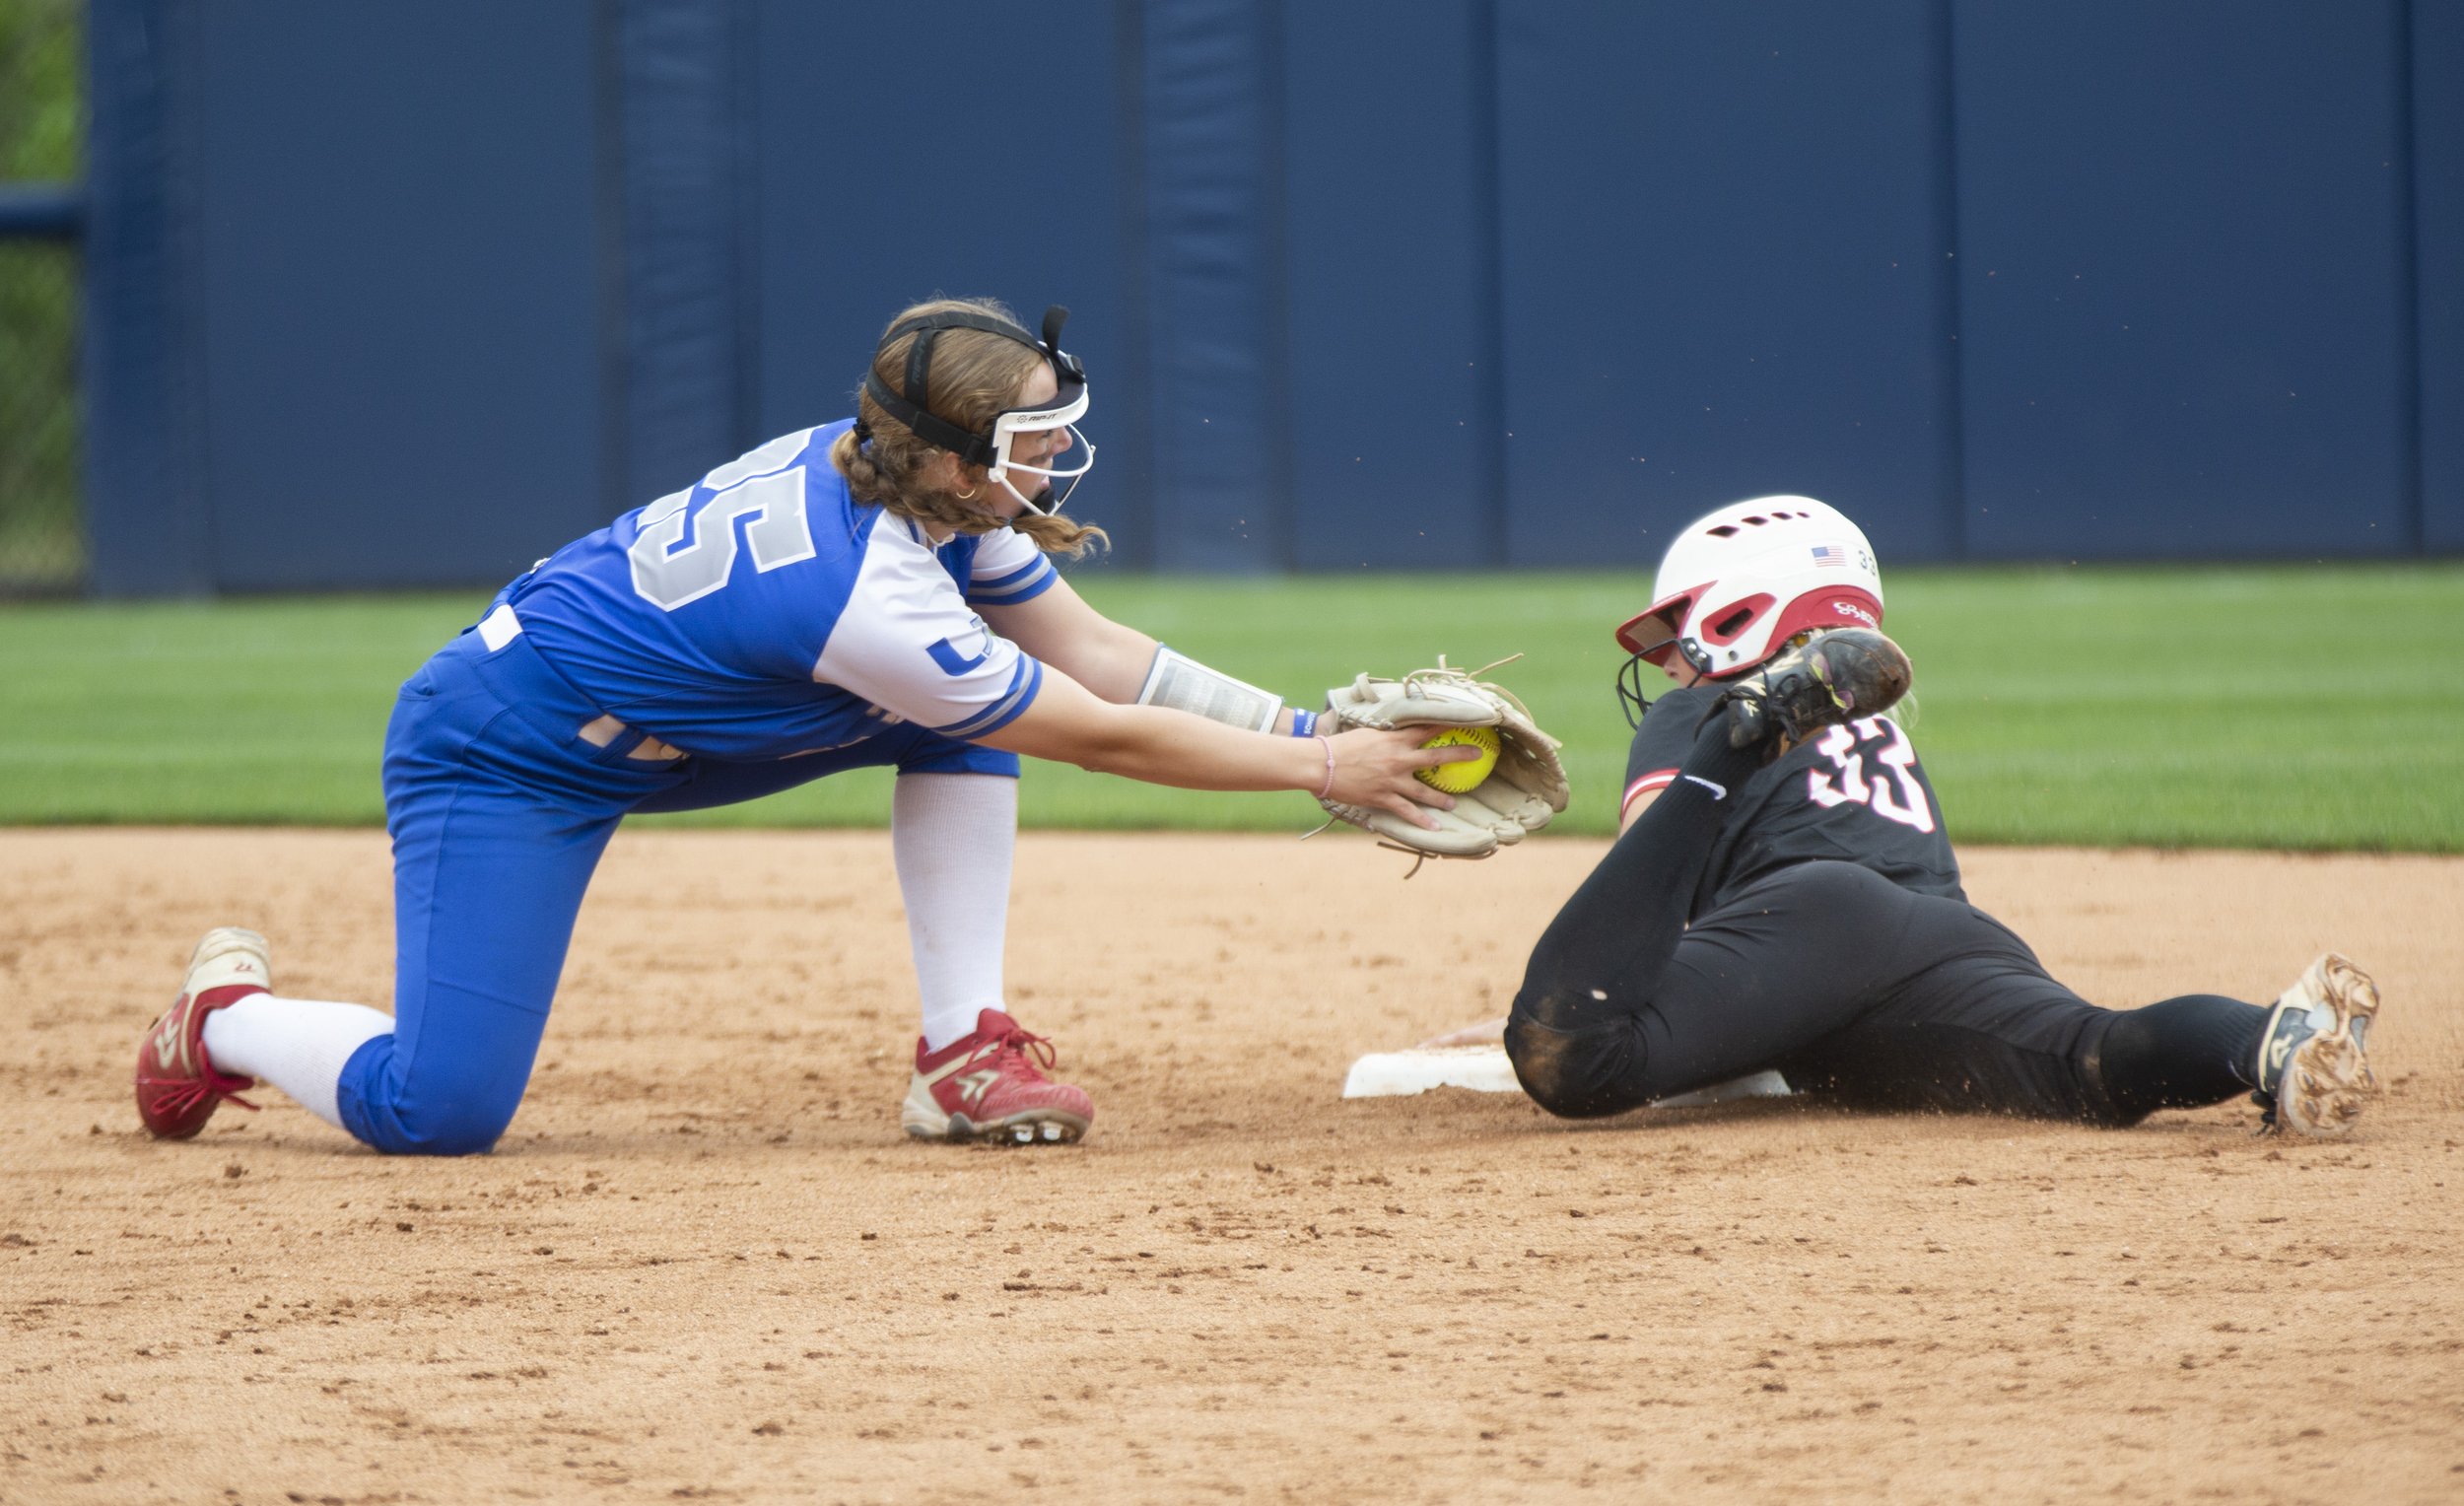  Union's Mallory Gorgacz tries to tag Tri-Valley's Cassidey Snyder in the PIAA 1A softball championship game on Friday, June 16, 2023, at Penn State's Beard Field. Snyder was called safe. (Emily Matthews/Pittsburgh Union Progress) 